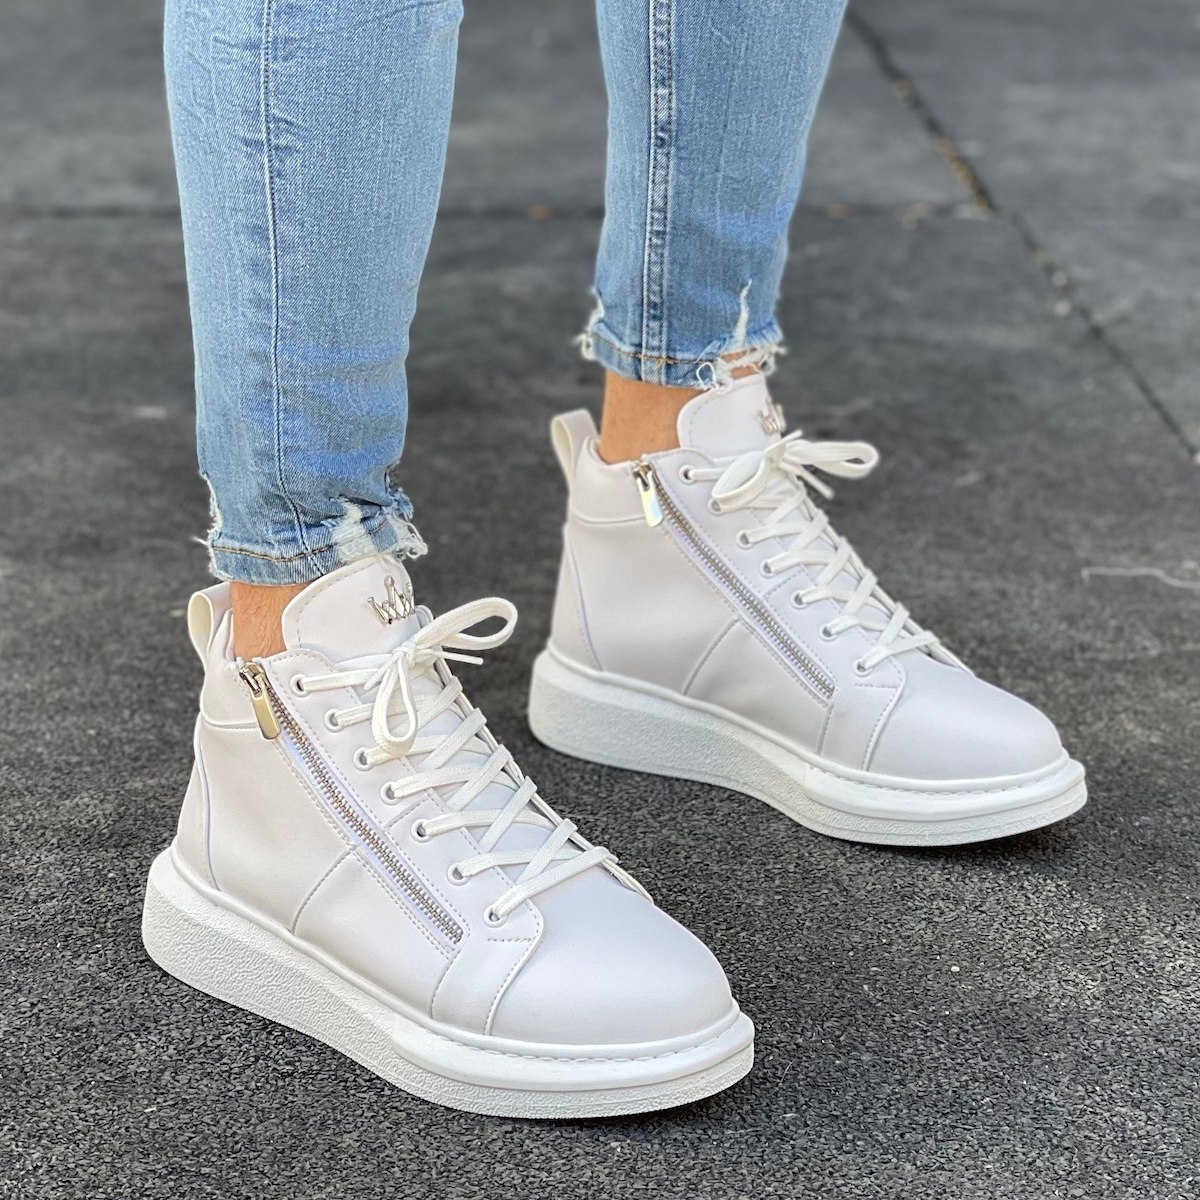 Designer Shoes Bape Sneakers Luxury Casual Shoes Woman Men Plate Forme  Bapestaesi Fashion Patent Leather Black White Outdoor Trainers Designer  Sneakers Chaussure From Free_postage_store, $30.54 | DHgate.Com